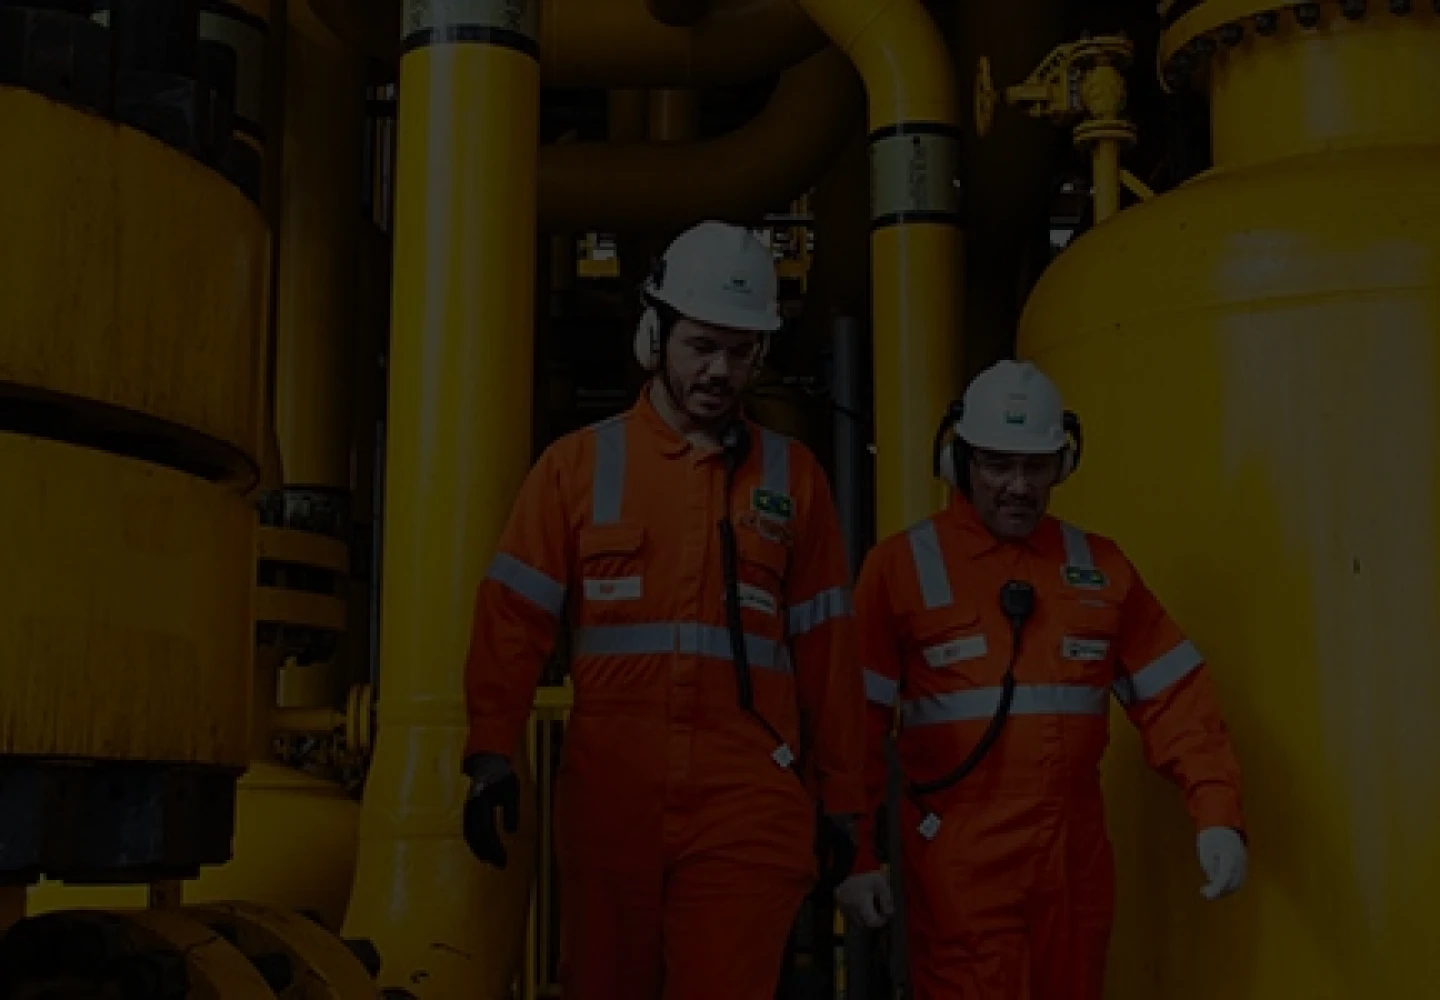 Petrobras Employees dressed in safety PPEs while working in a refinery.